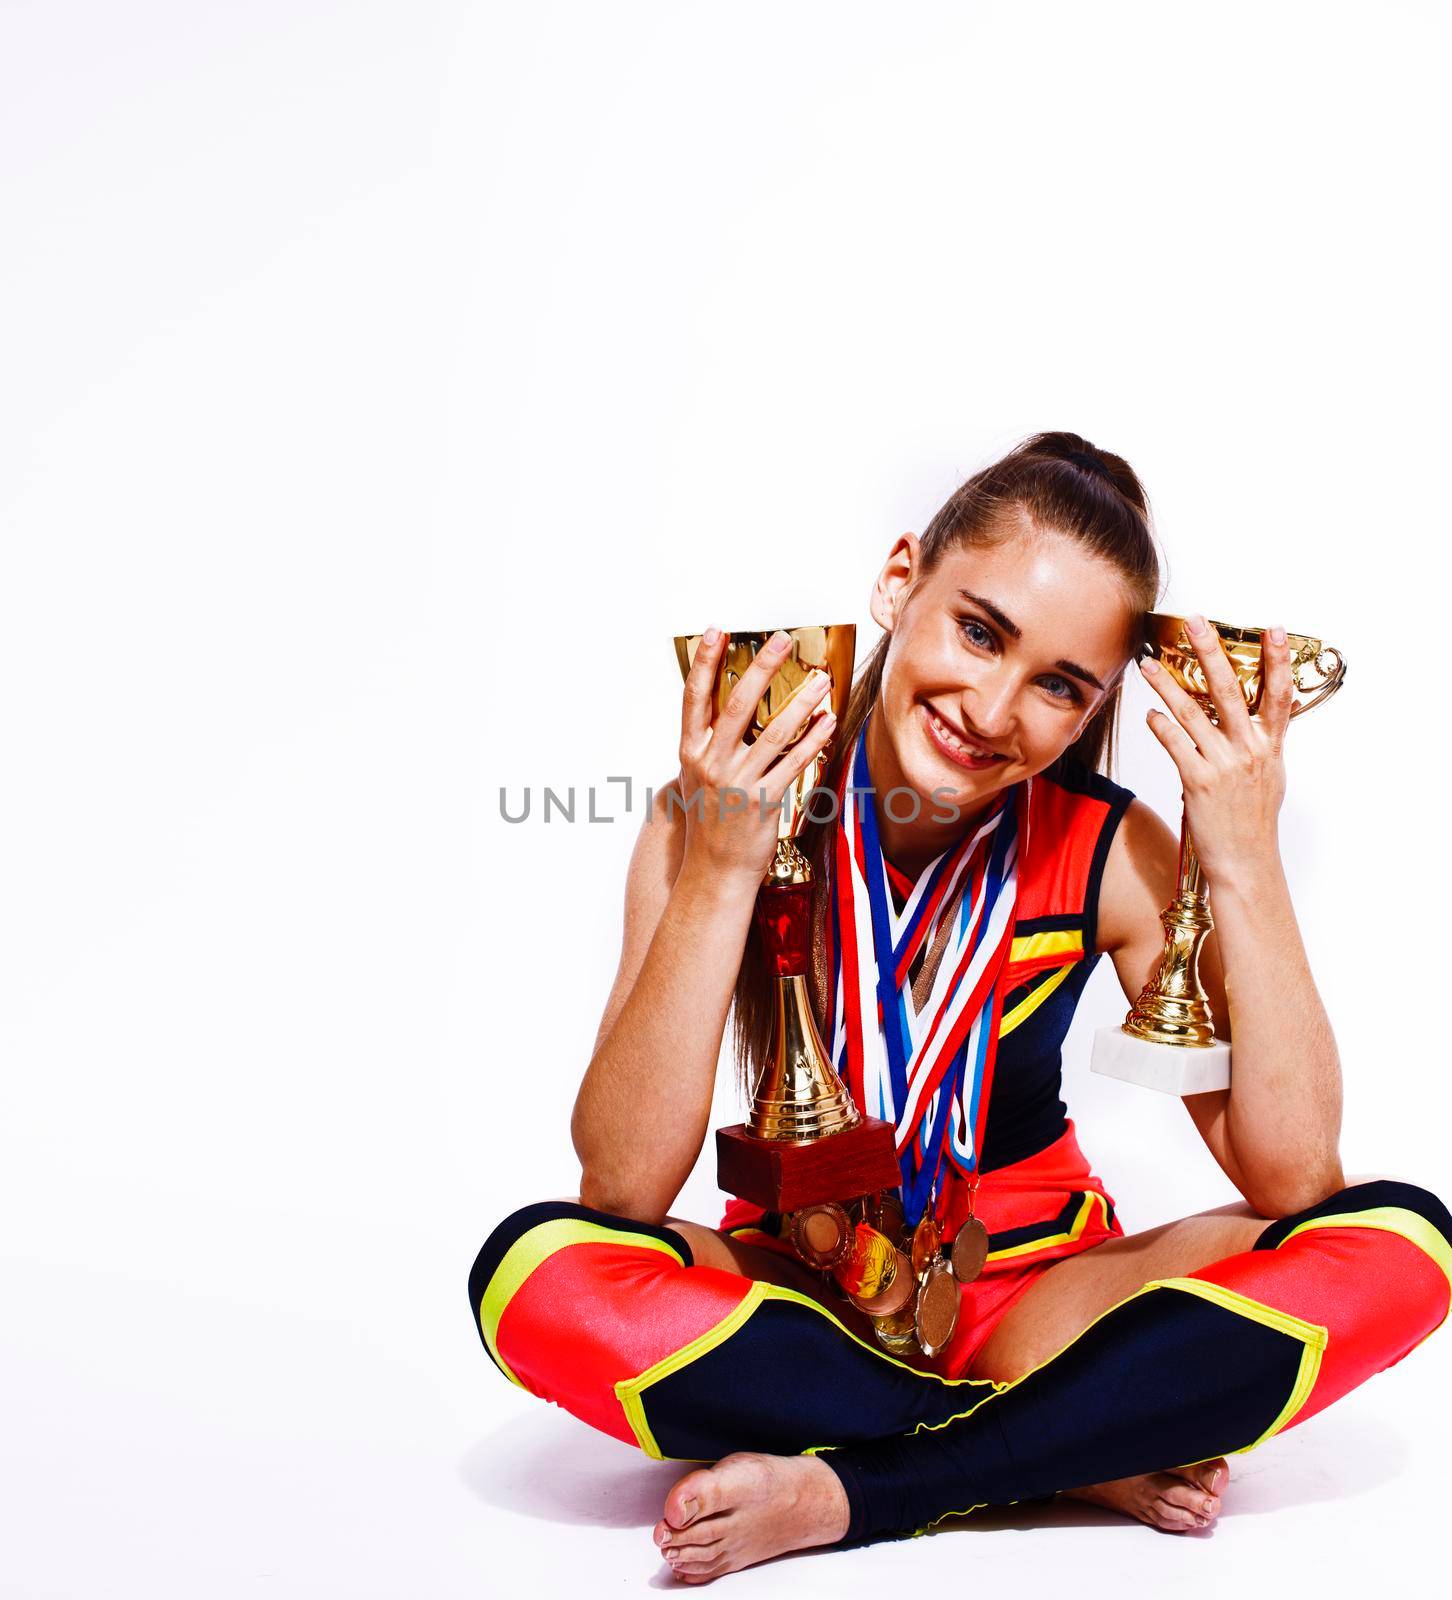 young smiling cheerleader girl with golden cups and price medals isolated on white background, lifestyle sport people concept by JordanJ